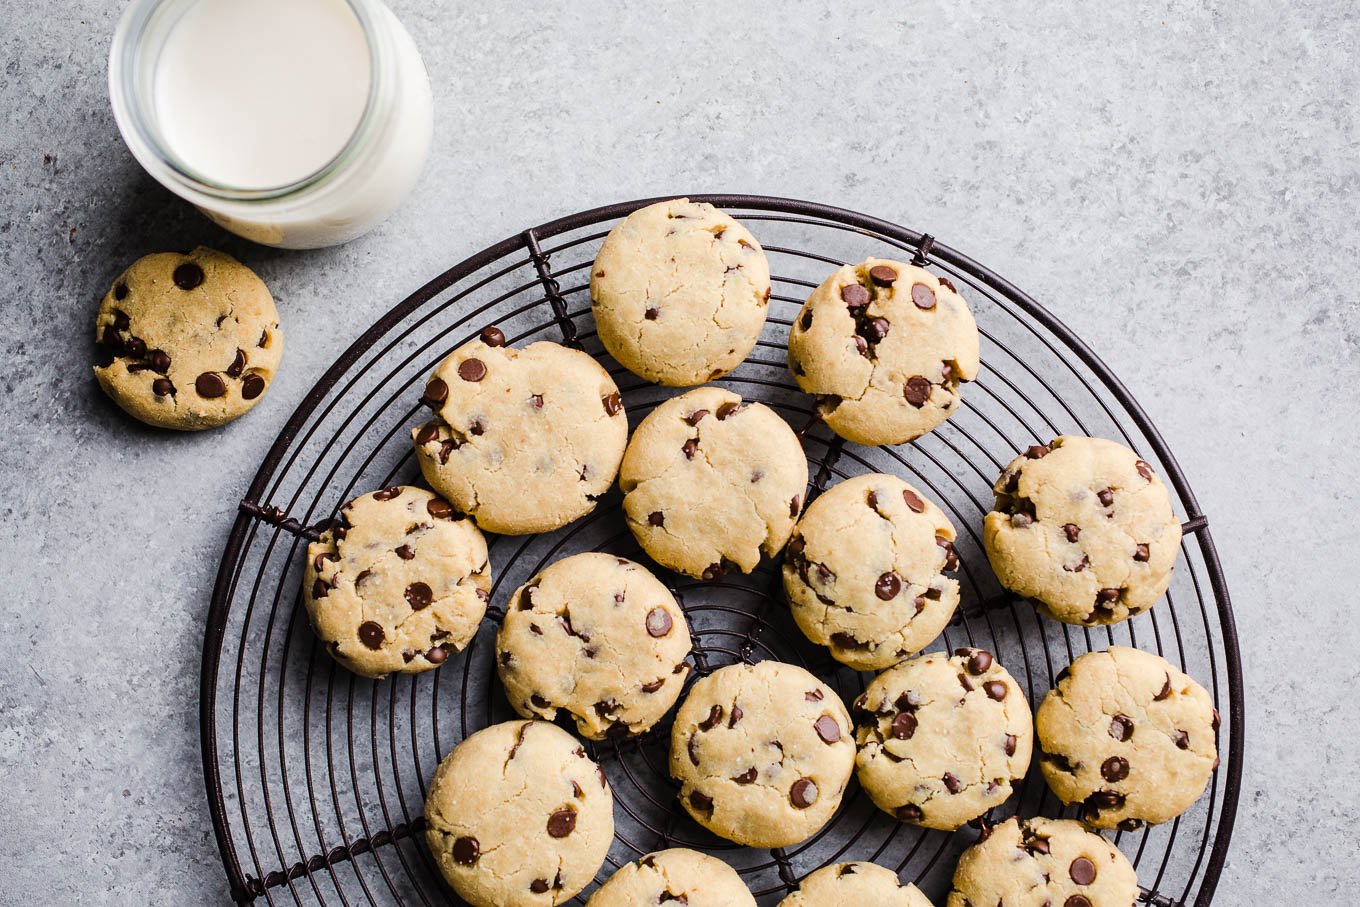 Gluten-Free Olive Oil Chocolate Chip Cookies made with almond flour, olive oil, maple syrup and chocolate chips. A healthy chocolate chip cookie recipe! Vegan.